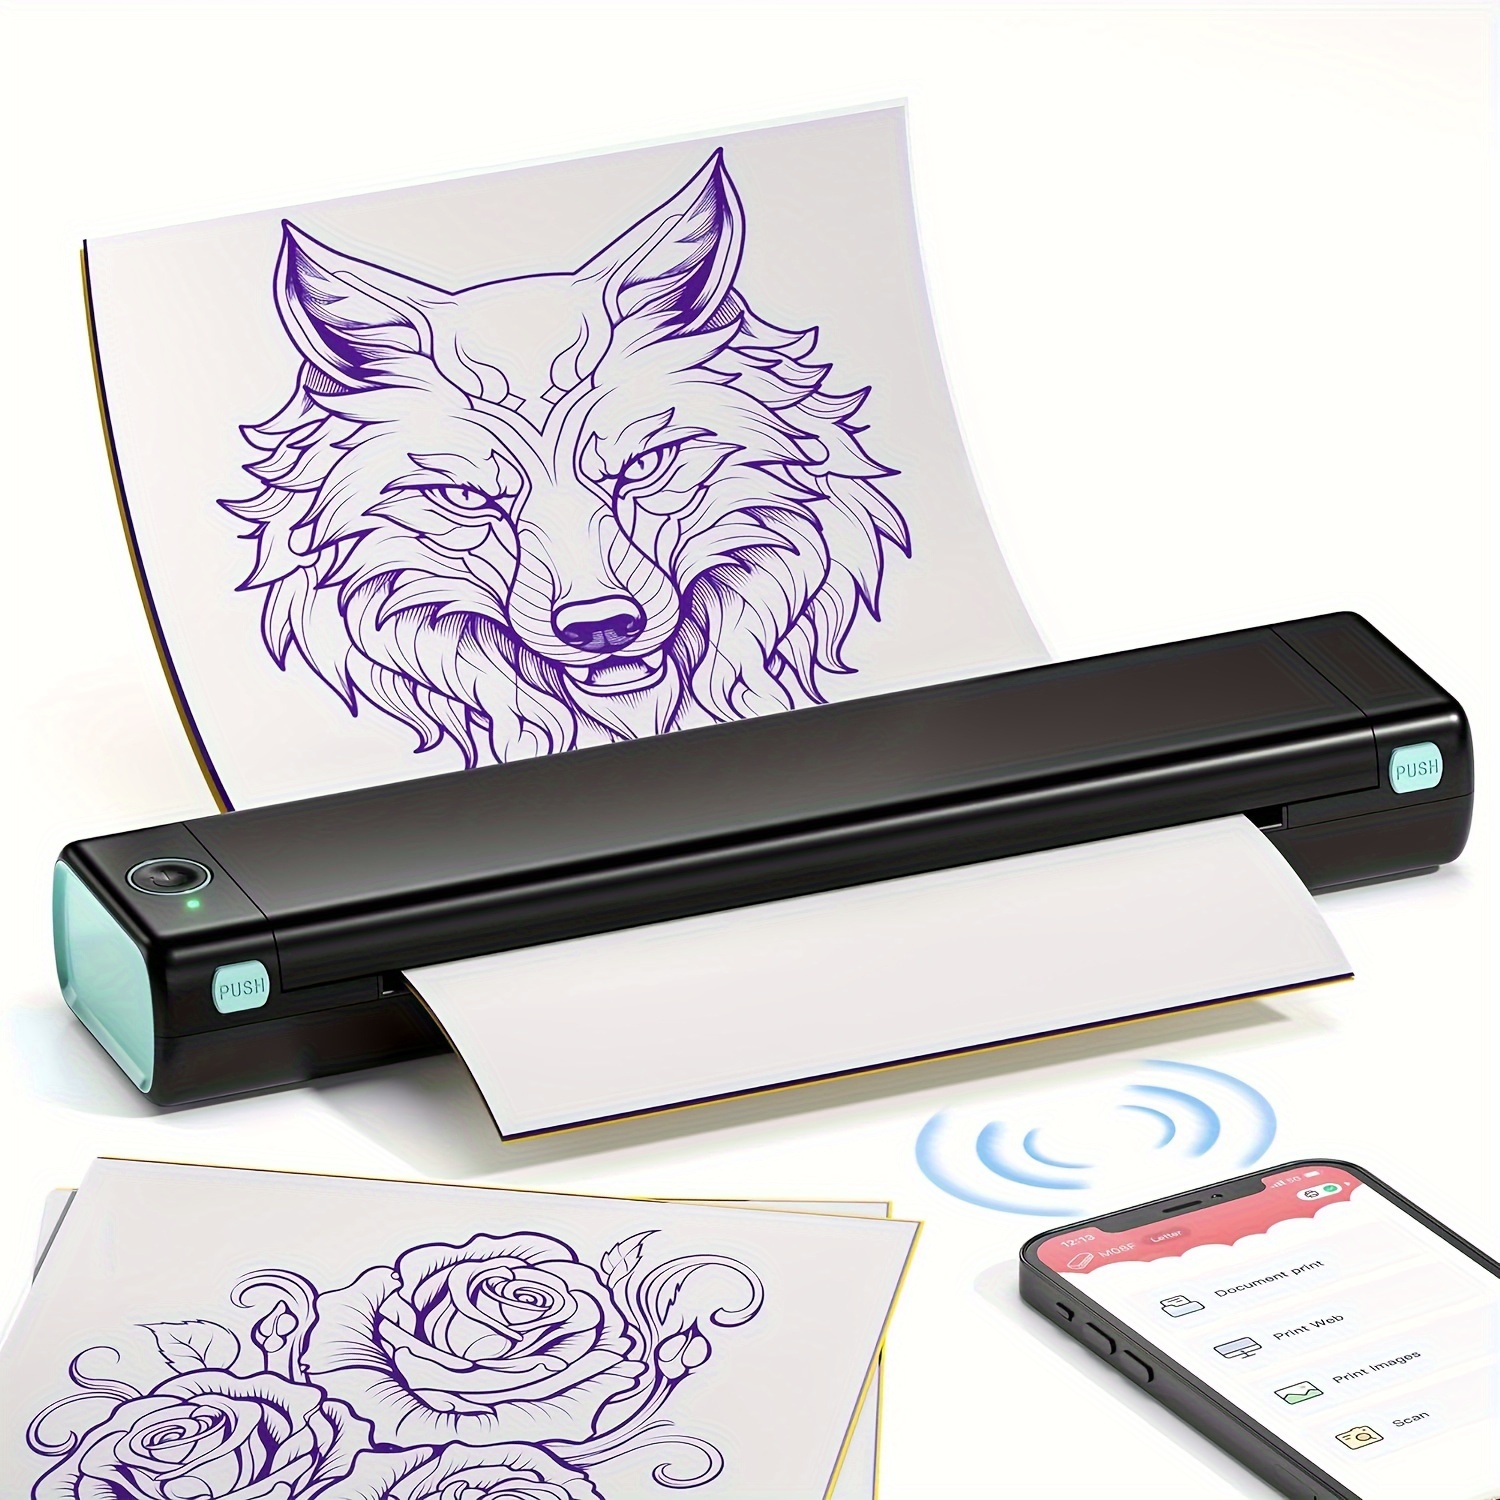 

Phomemo M08f Tattoo Stencil Printer Tattoo Printer Thermal Printer For Diy Tattoos, Portable Printer Tattoo Machine, Compatible With Smartphone & Pc, With 10pcs A4 Tattoo Transfer Papers